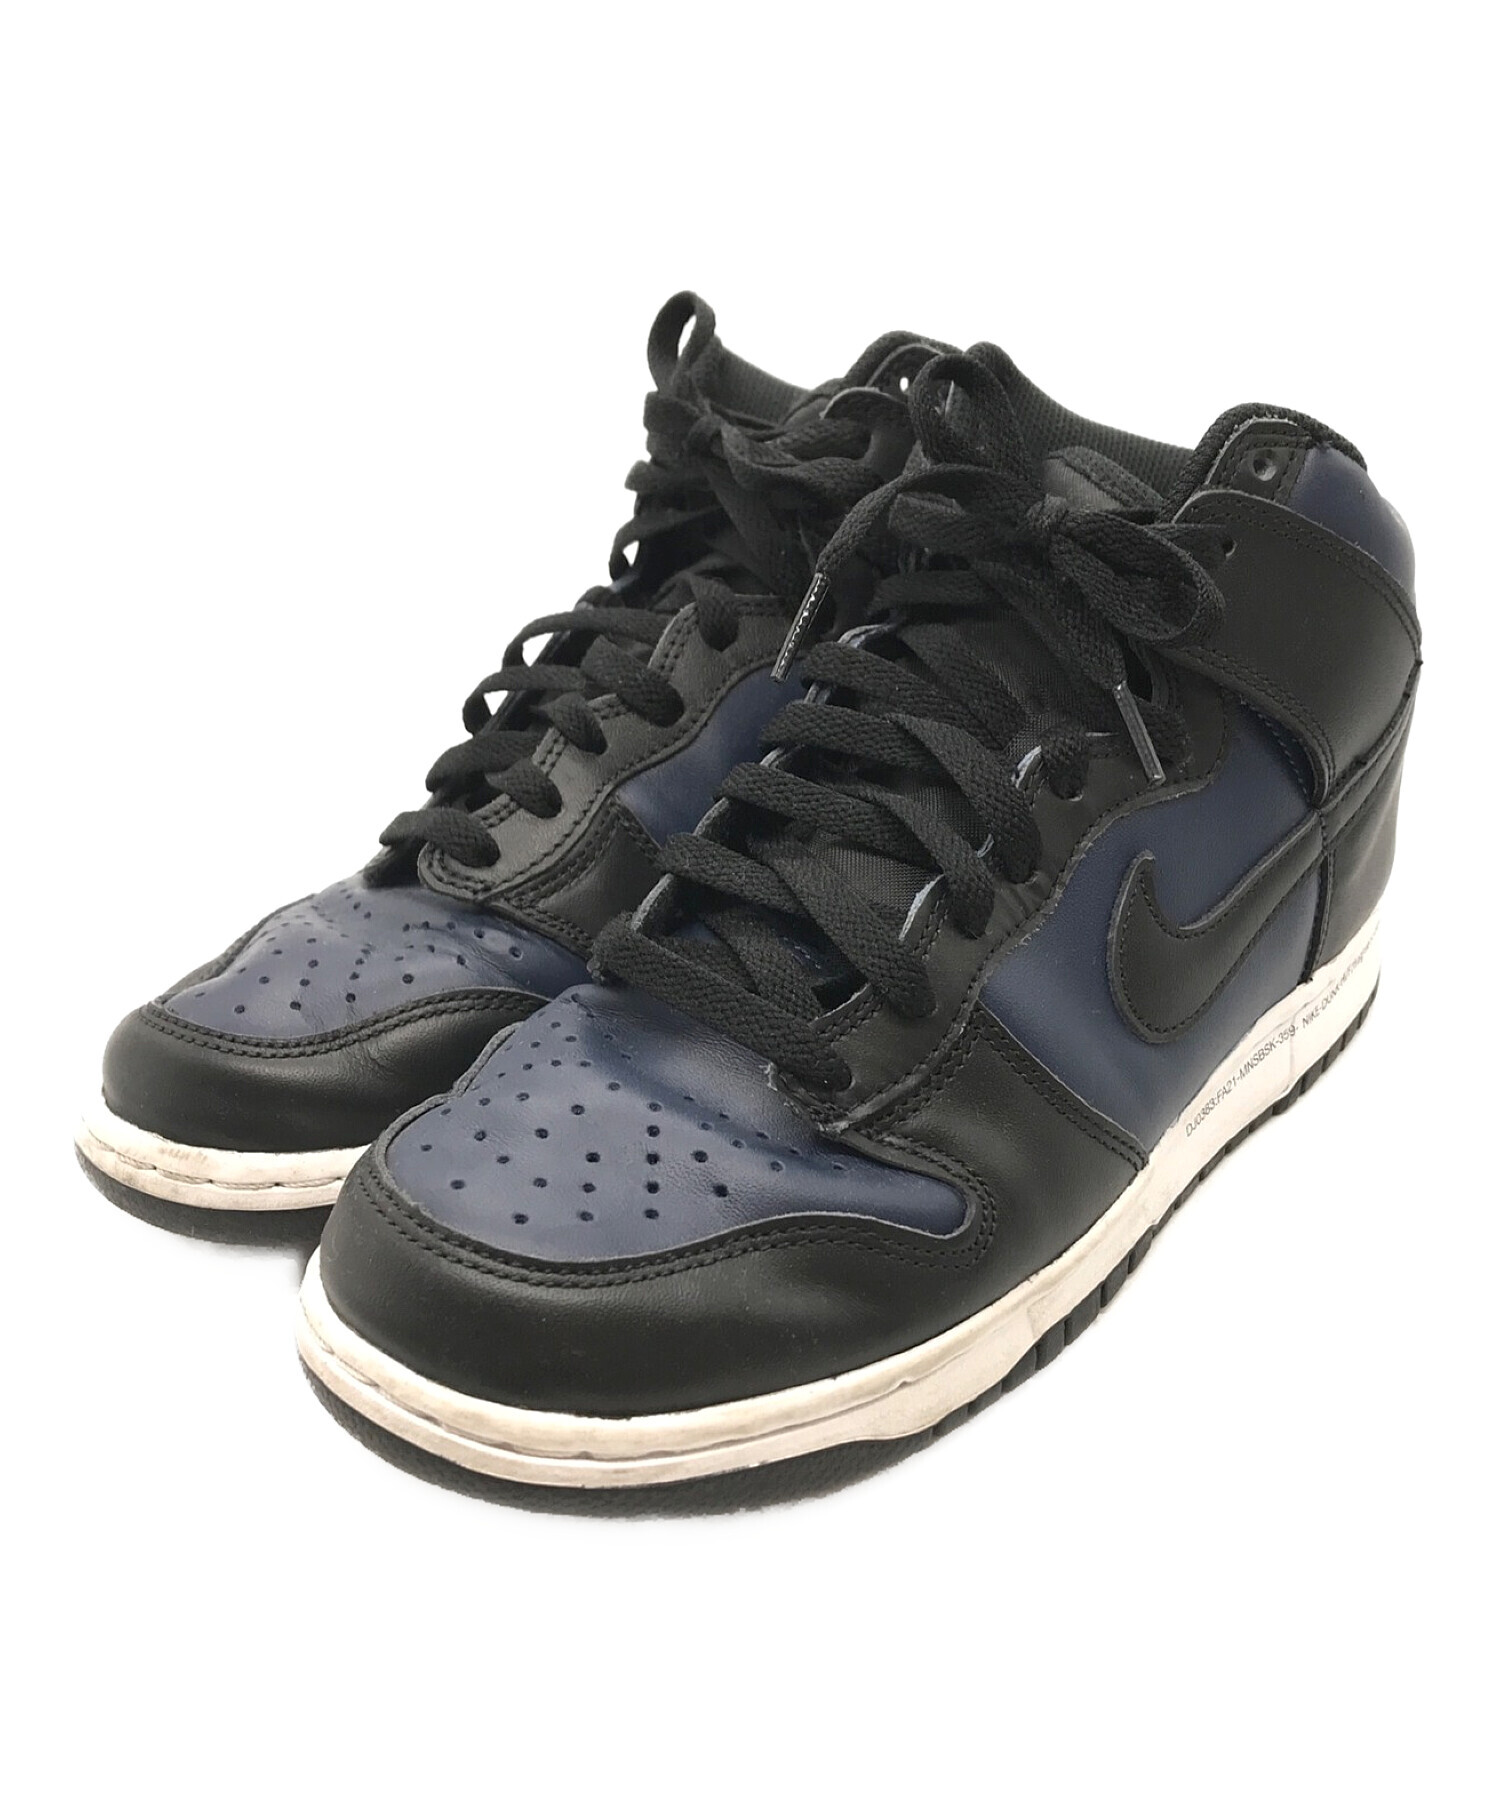 NIKE fragment dunk 26.0 新品未使用 送料込 フラグメント